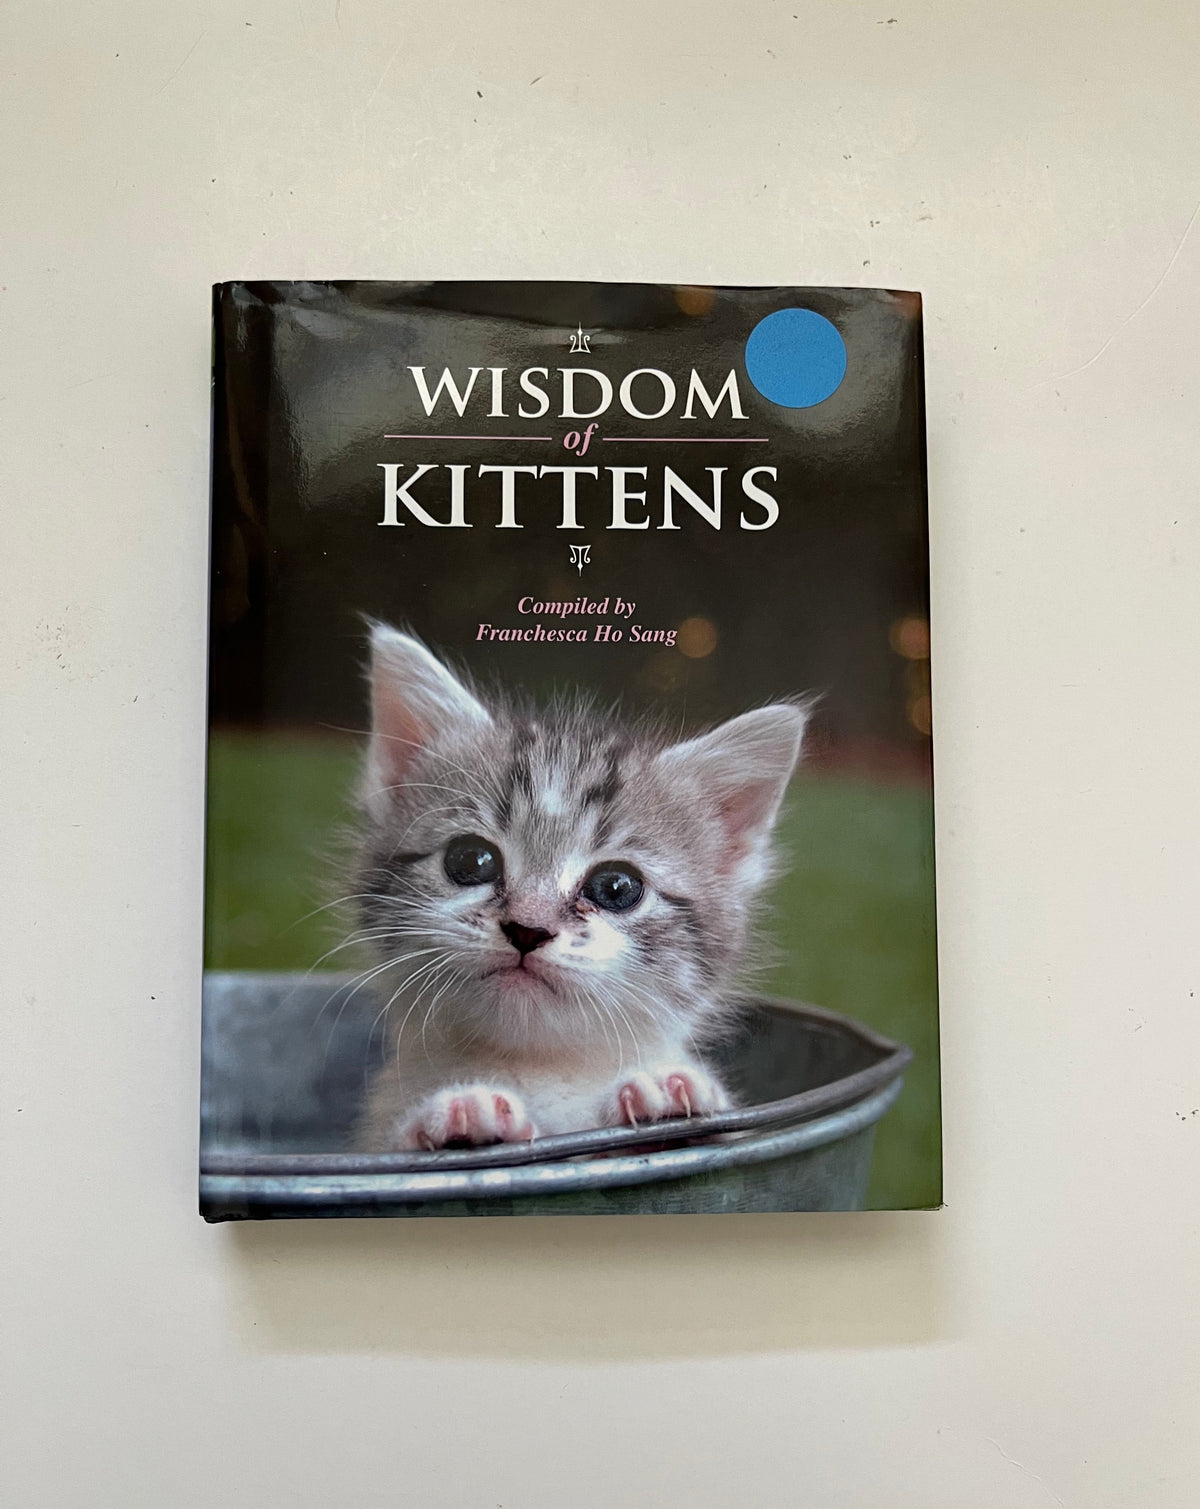 Wisdom of Kittens by Franchesca Ho Sang